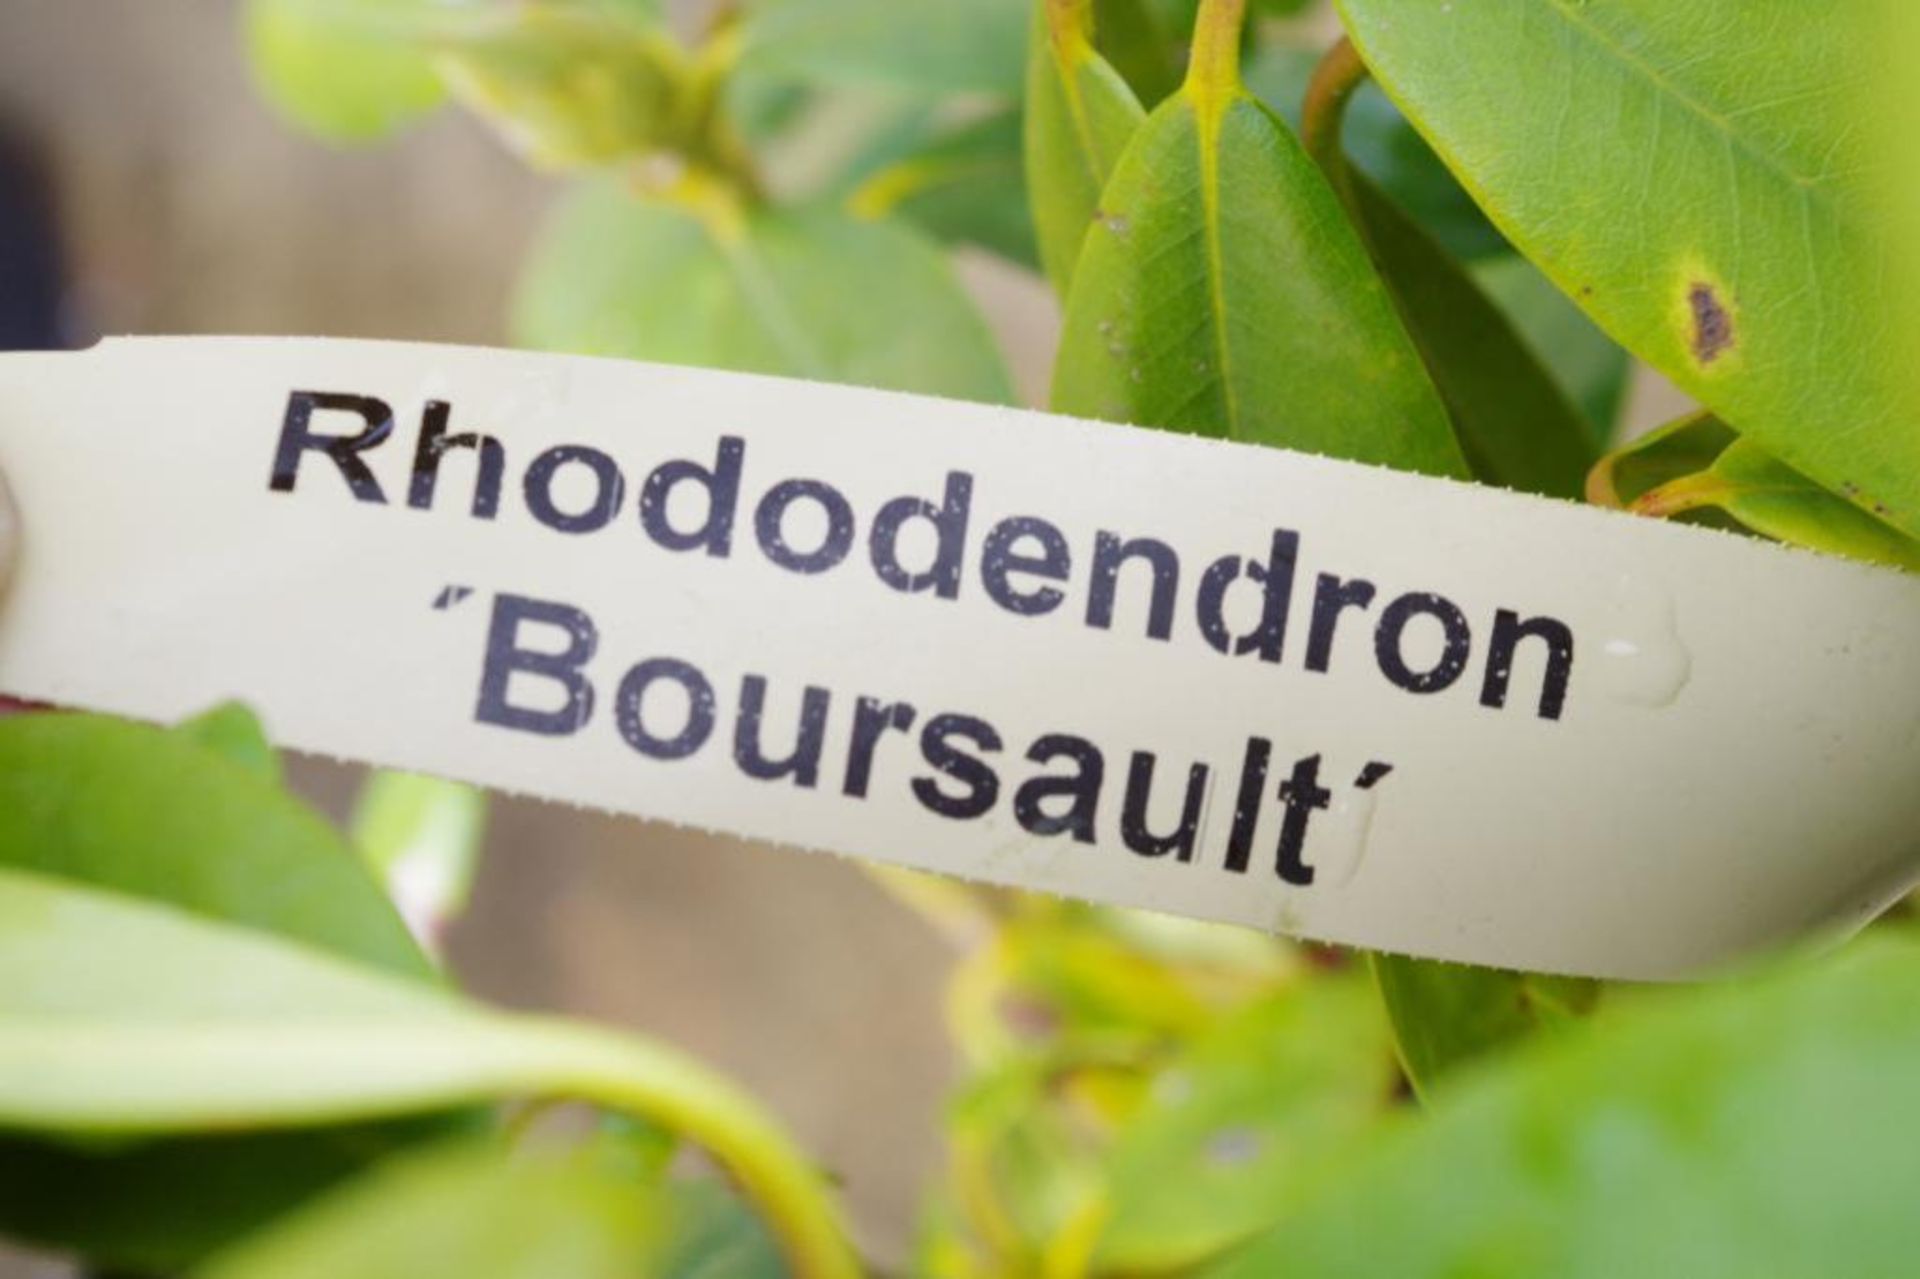 Rhododendron 'Boursault' Plant - Image 3 of 3